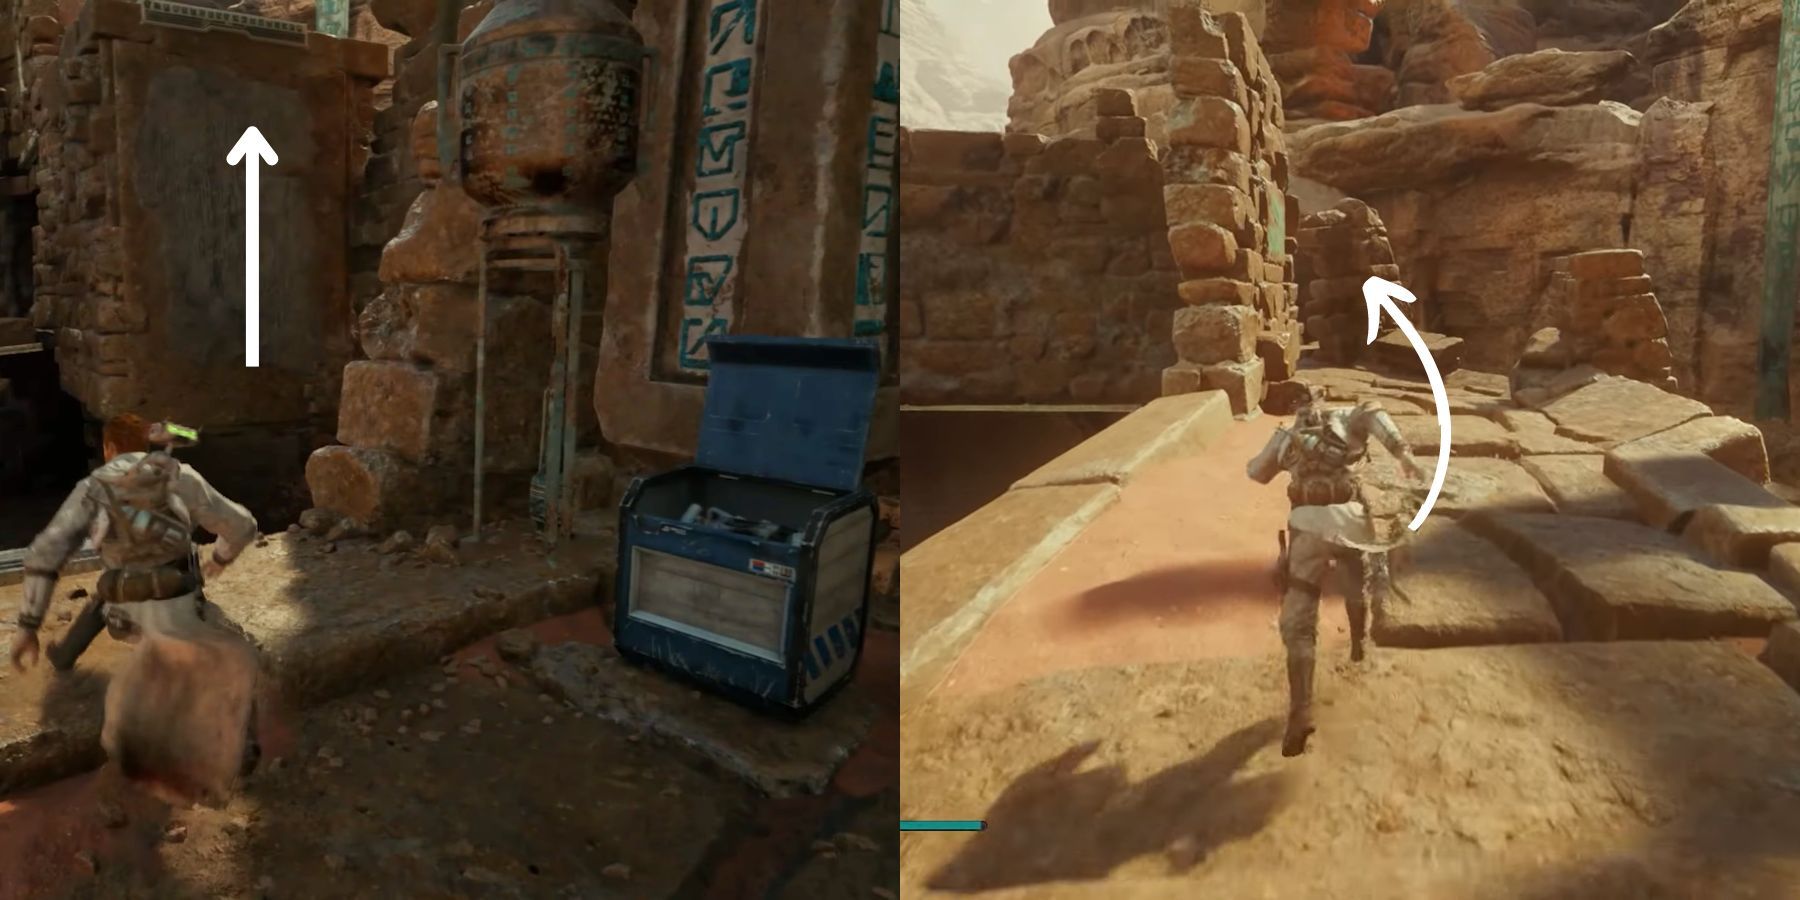 image showing the location of wanderer pants colors in jedi survivor.